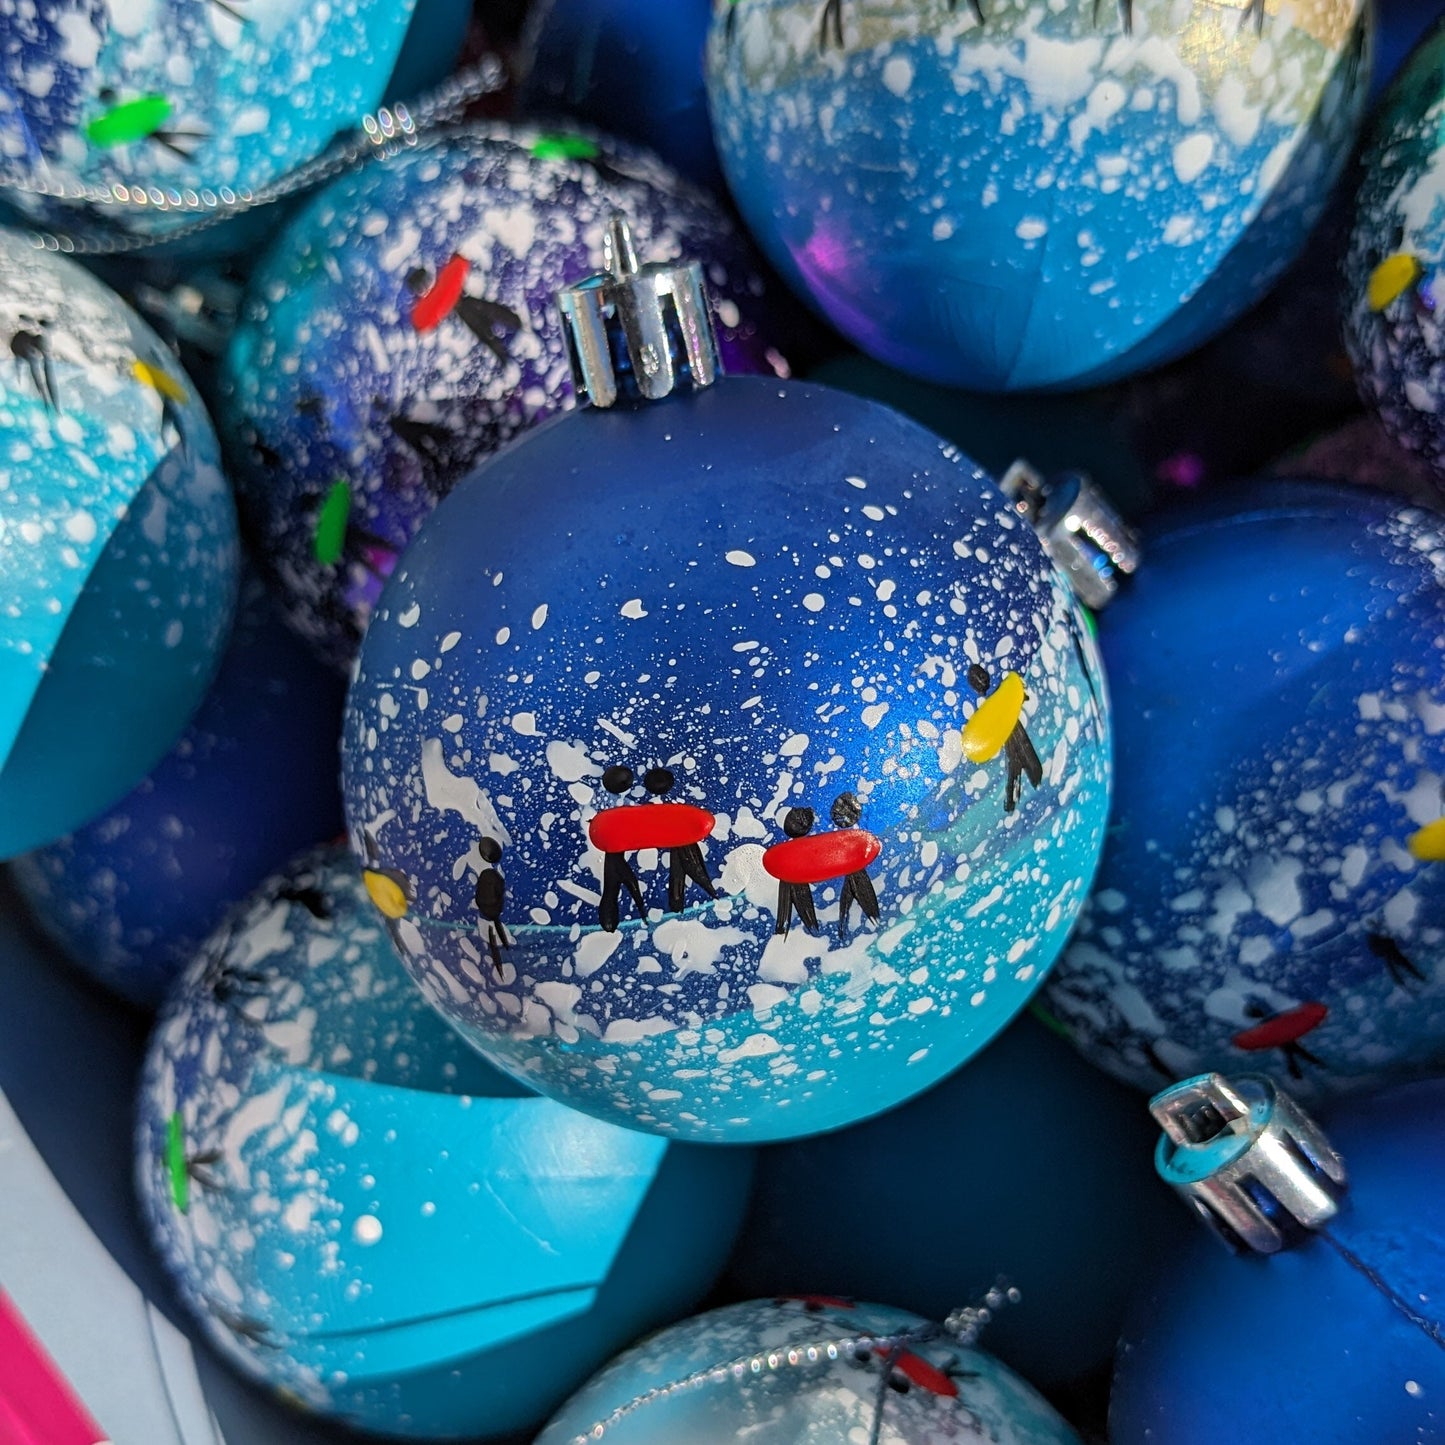 Hand Painted Bauble - Padstow - Choose Colour